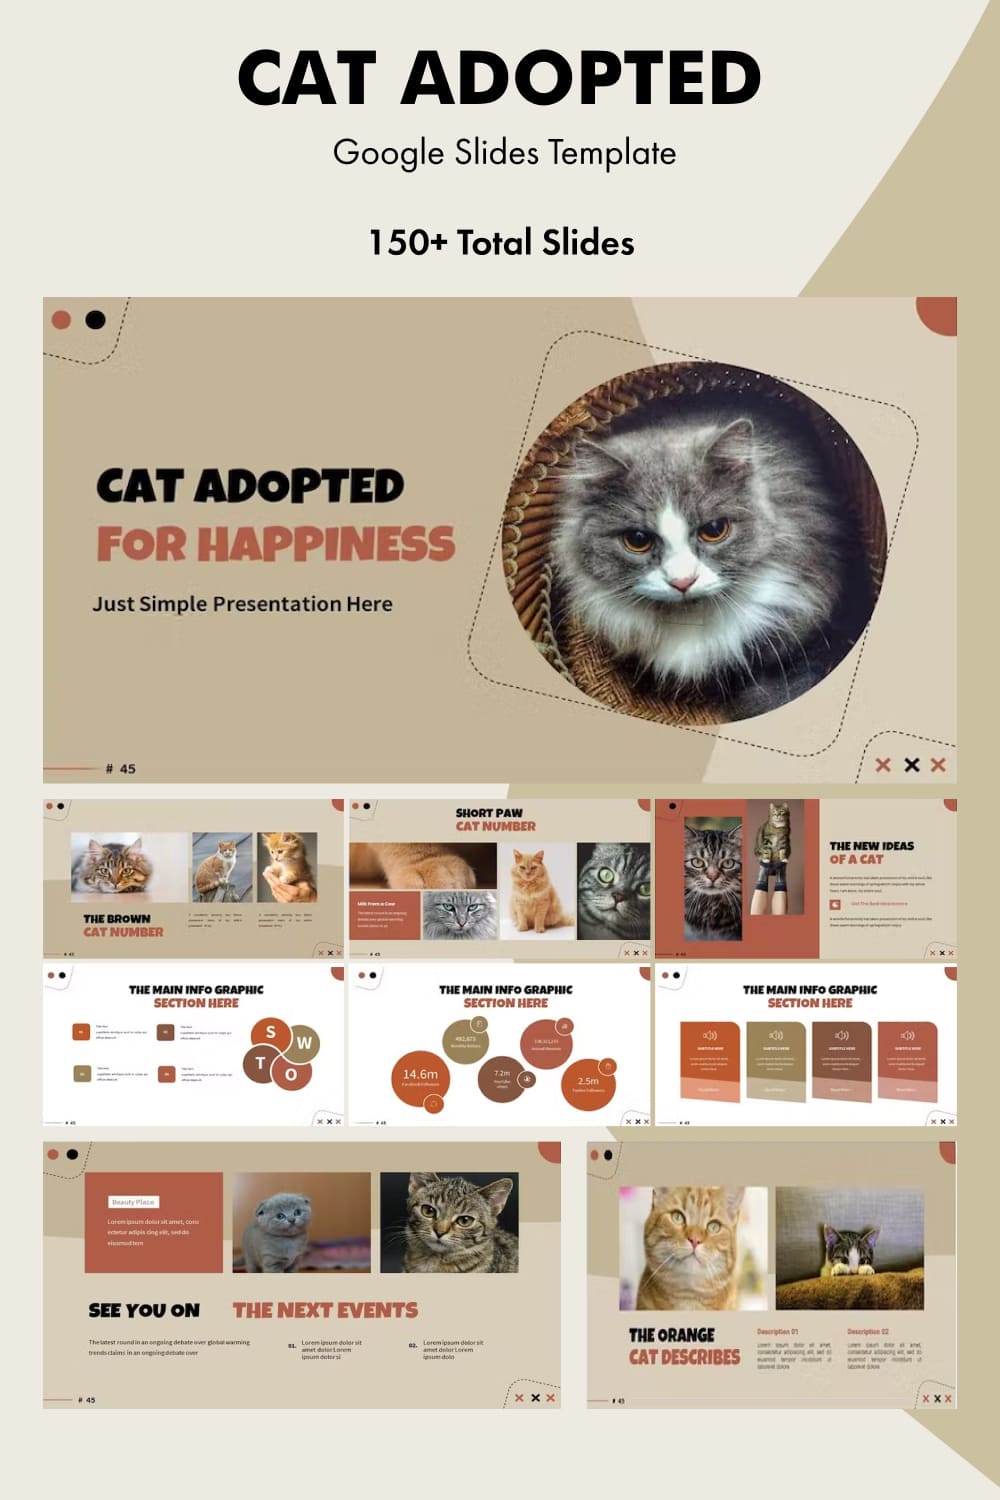 Cat Adopted For Happiness | Google Slides Template - Pinterest.